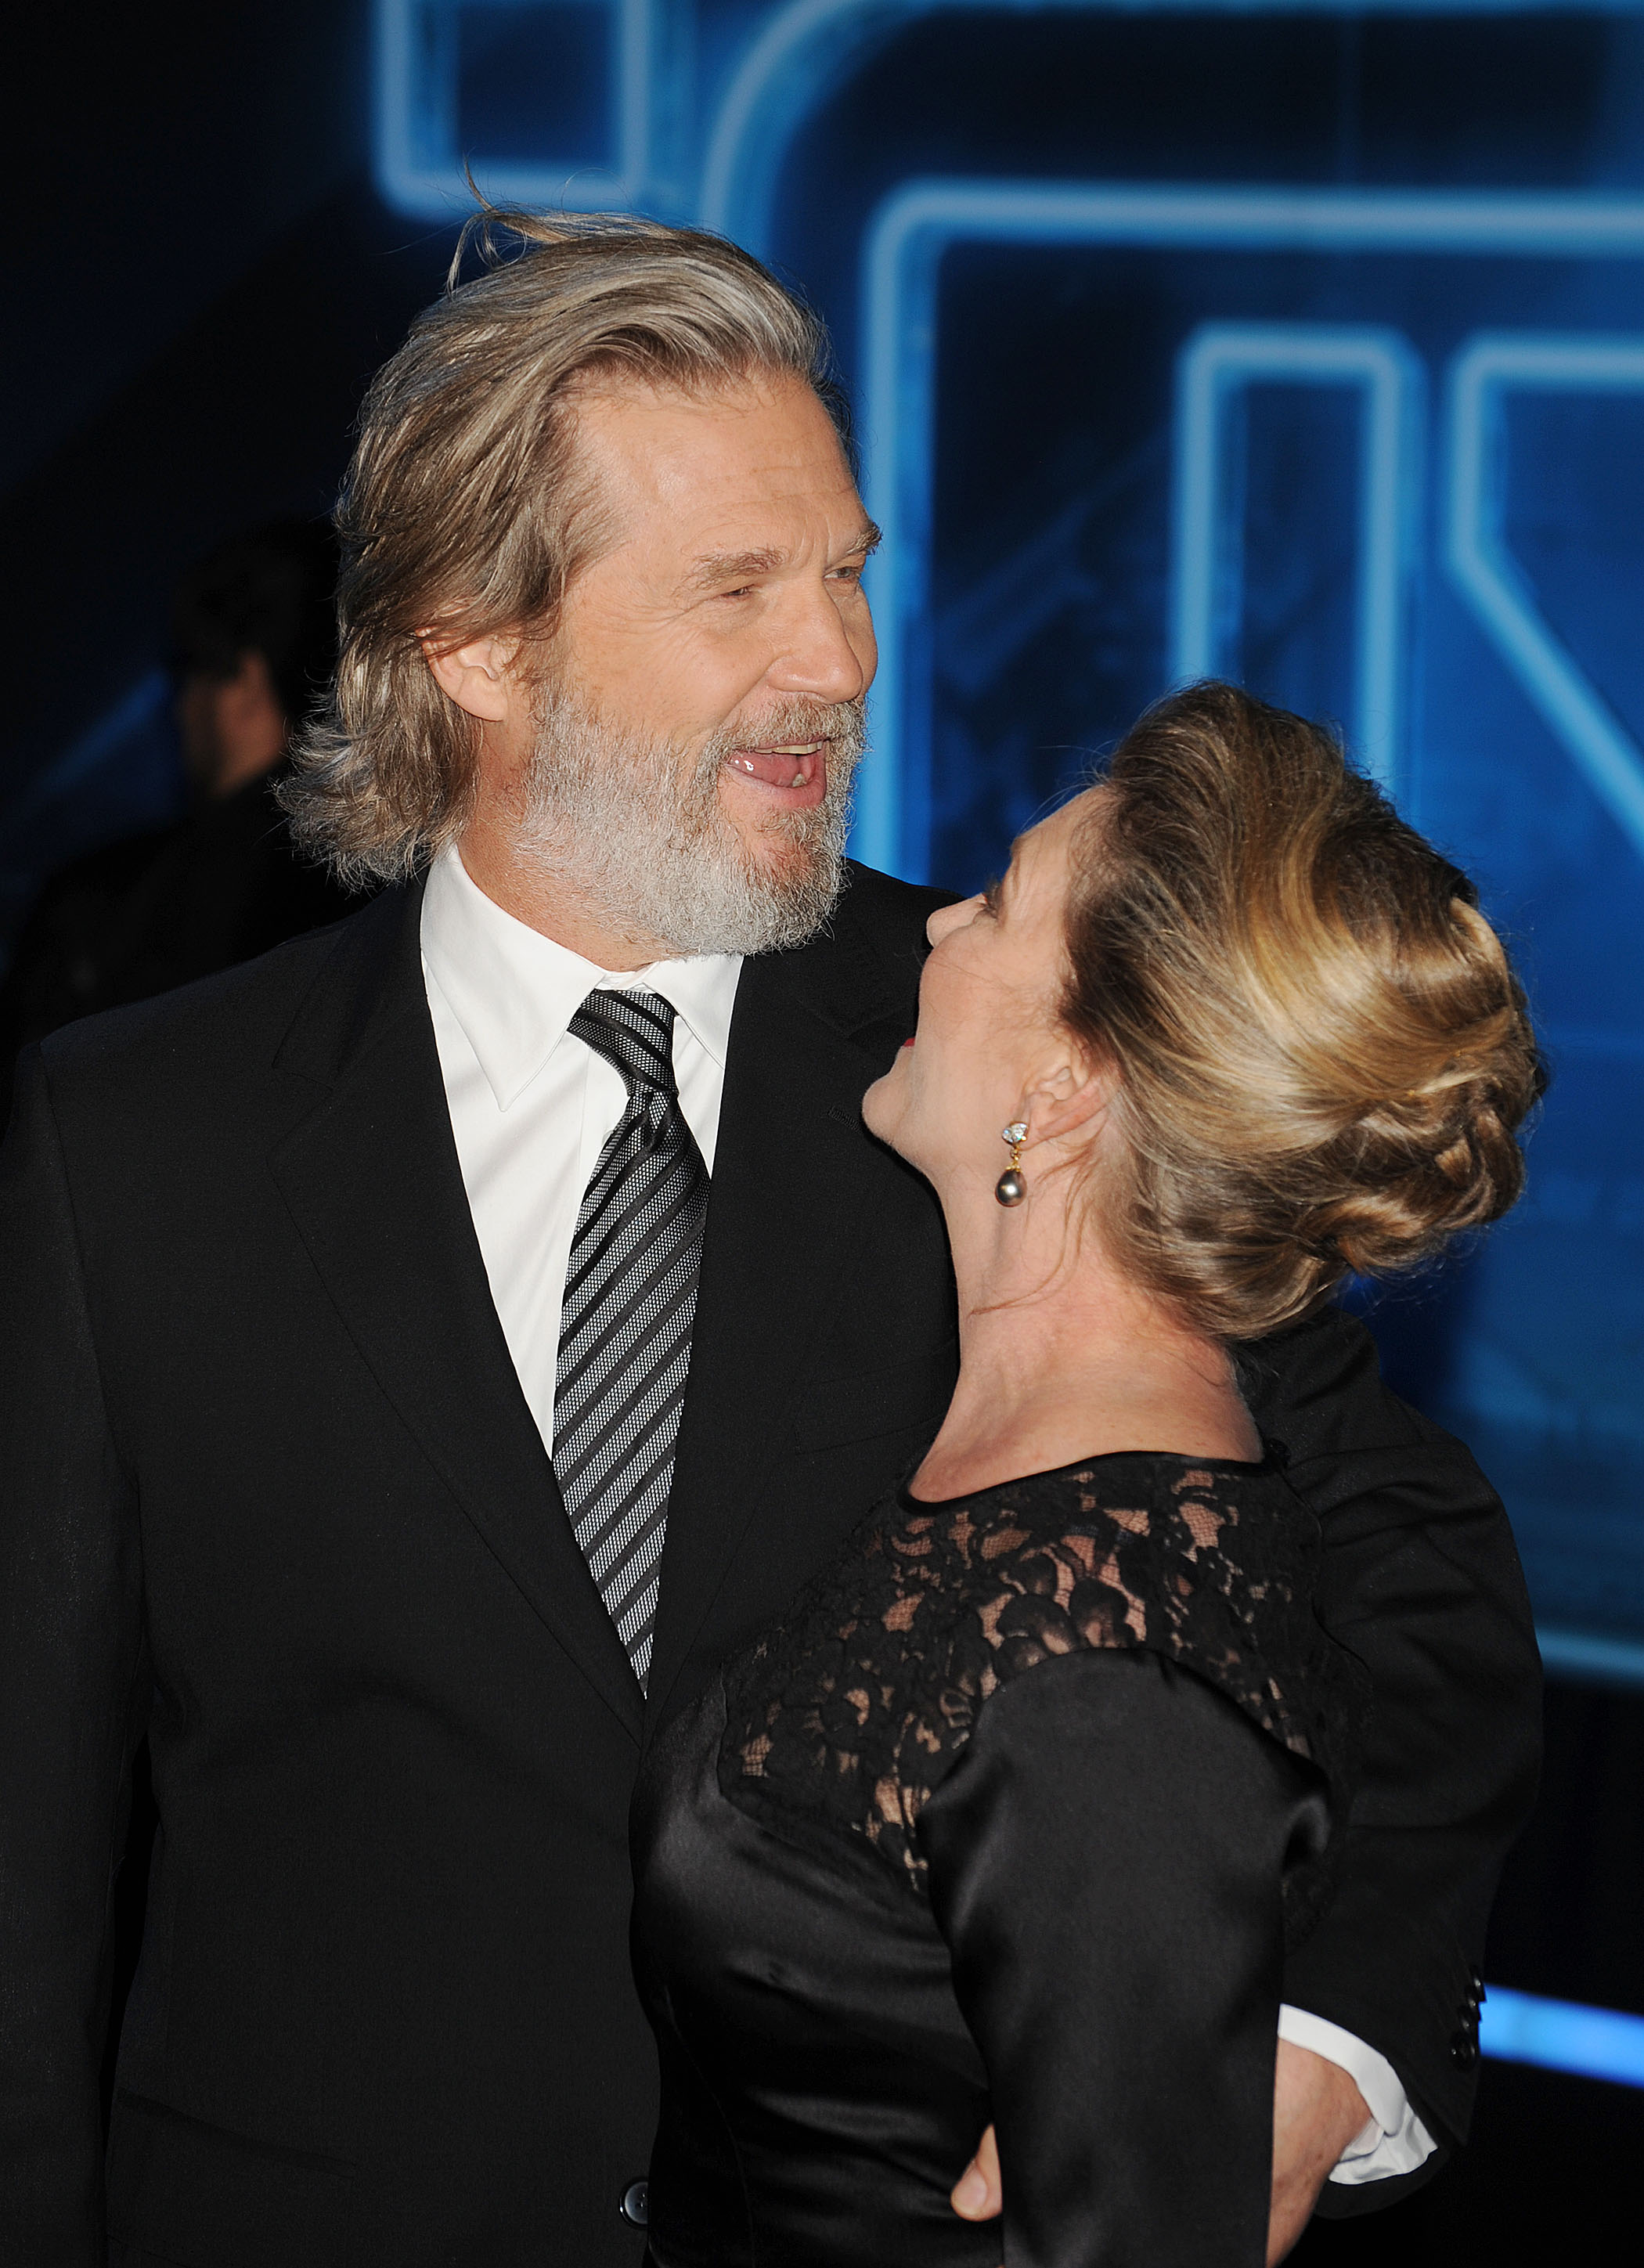 Jeff and Susan Bridges arrive at the World Premiere of "TRON Legacy" at the El Capitan Theatre in Hollywood, California on December 11, 2010. | Source: Getty Images